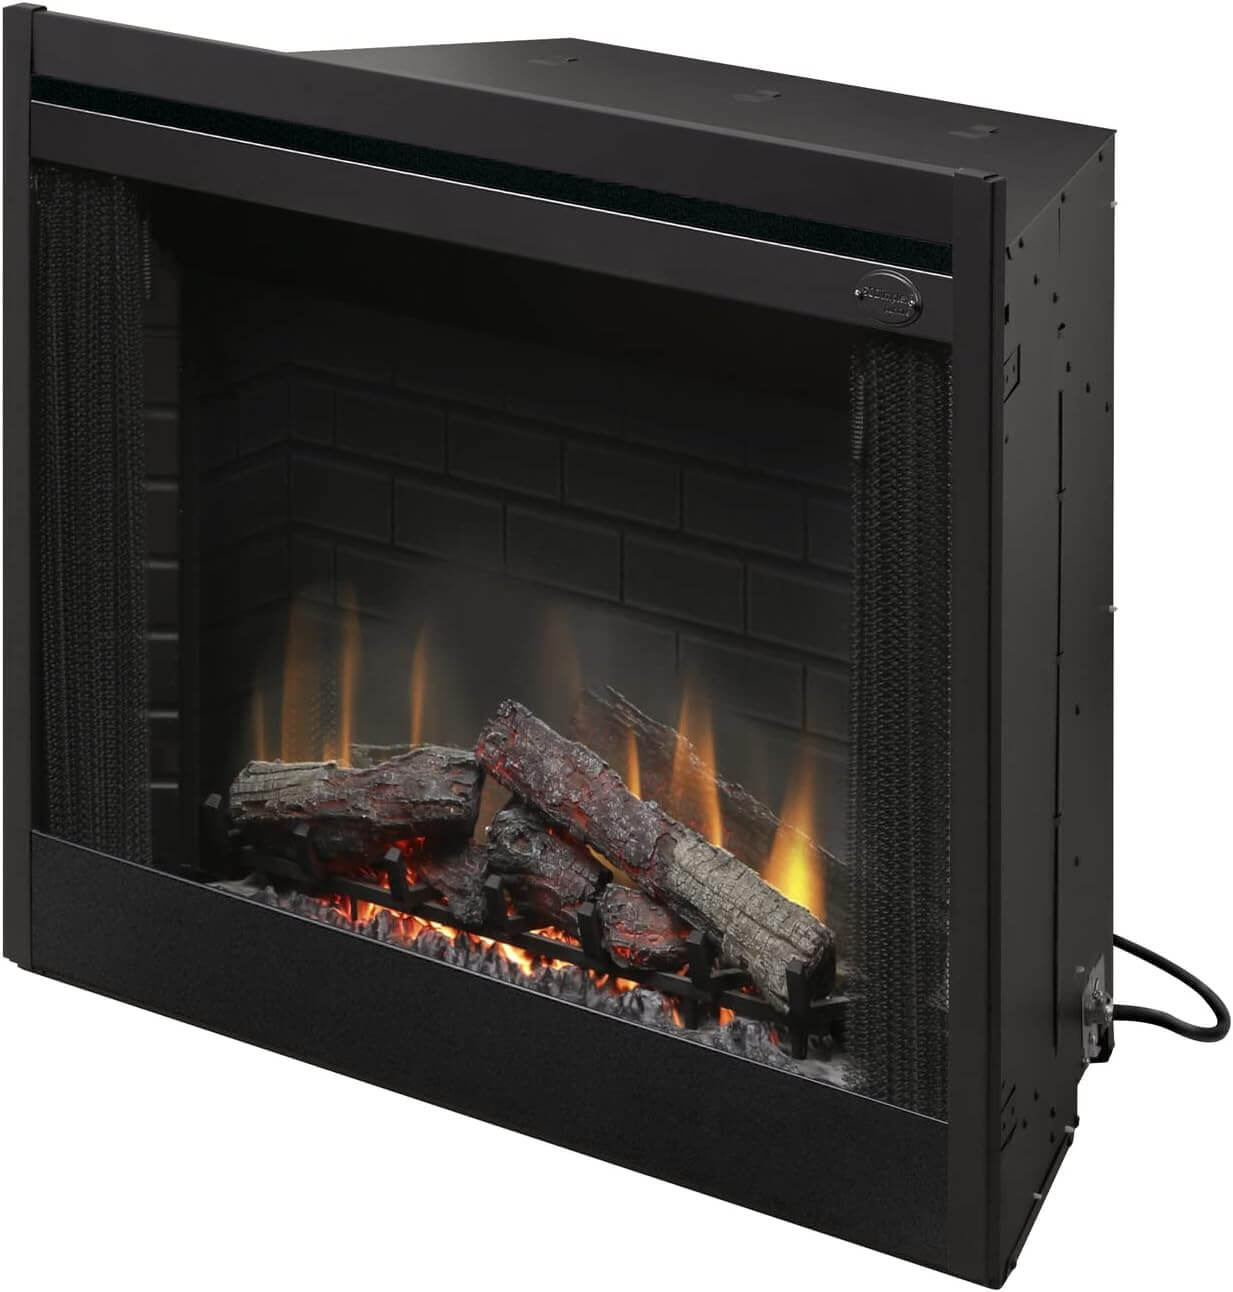 Dimplex DELUXE 39" Traditional Built-In Electric Firebox Fireplace, BF39DXP